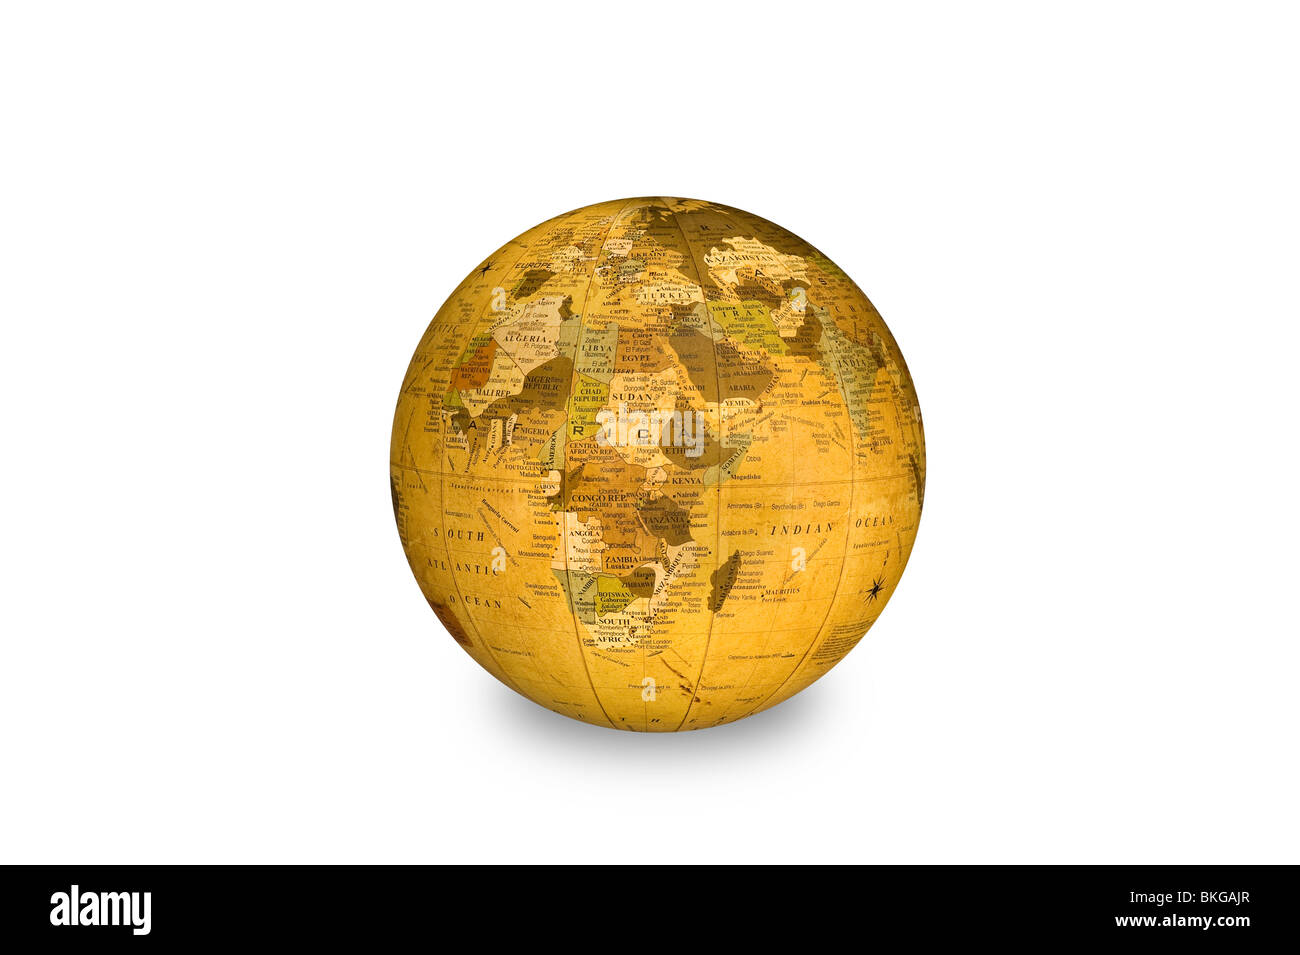 An isolated world globe shows Africa as its main focal point. Stock Photo